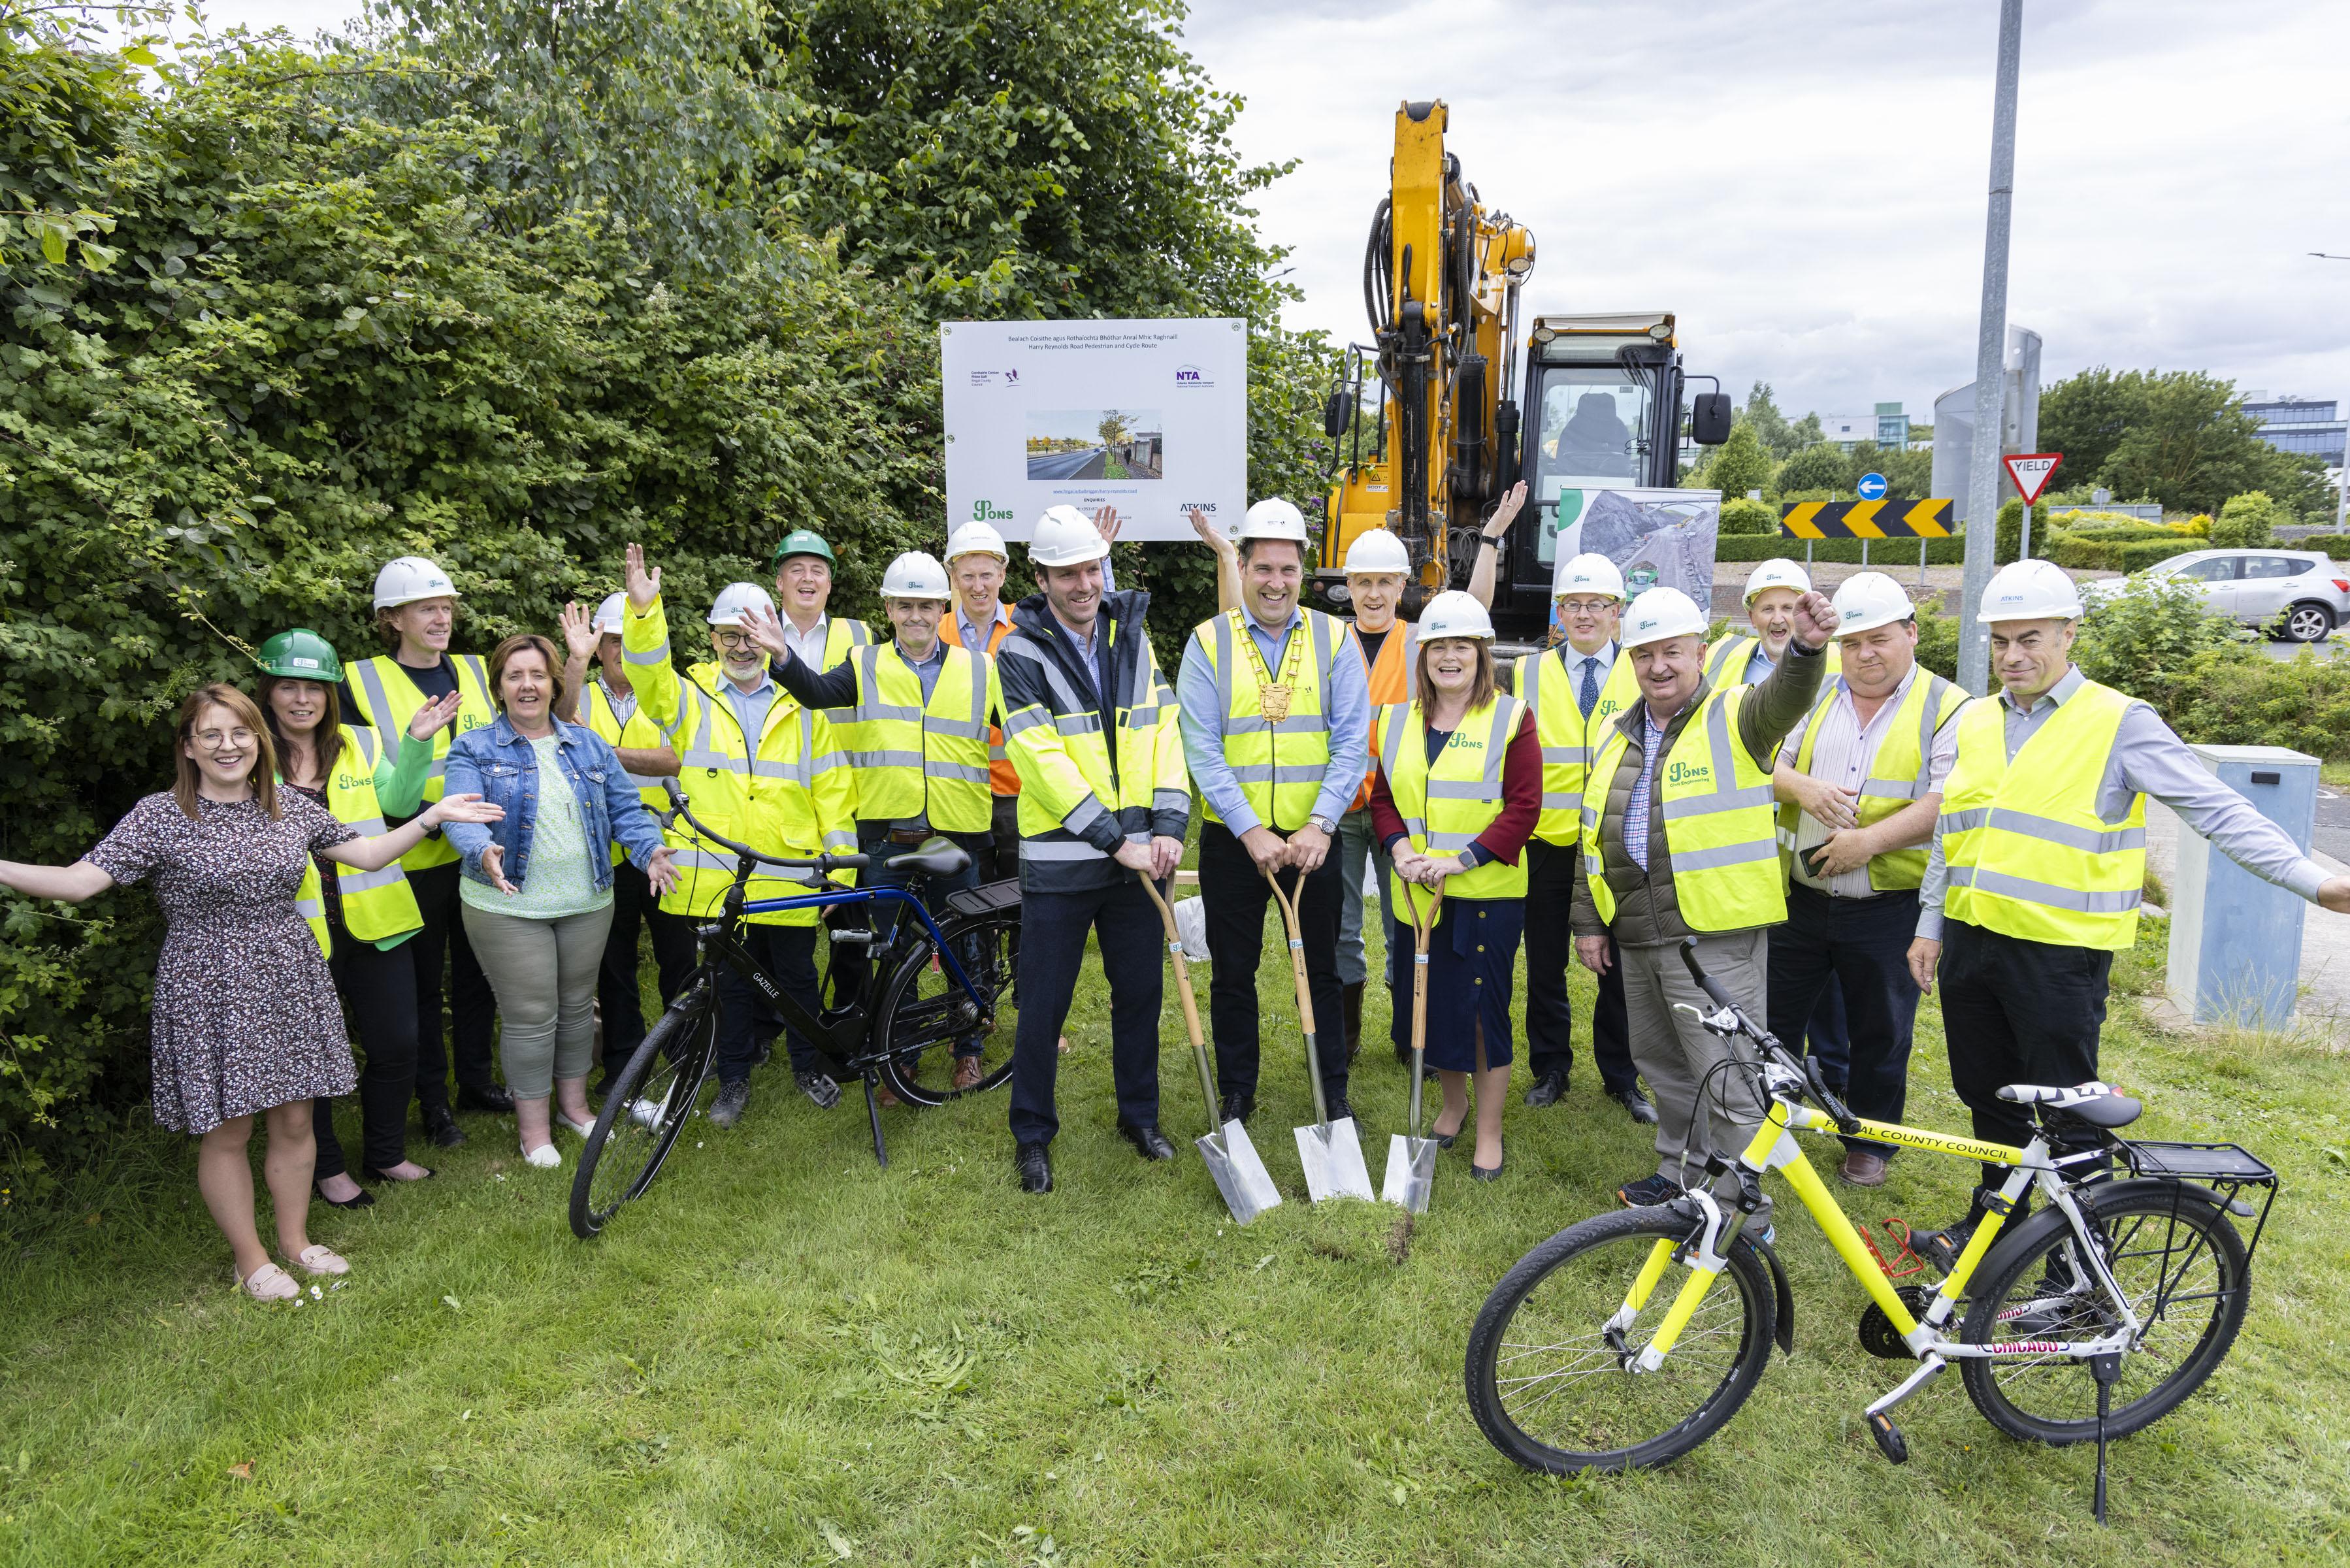 Mayor, CE, Local Cllrs, Contractors and Fingal team at sod turning